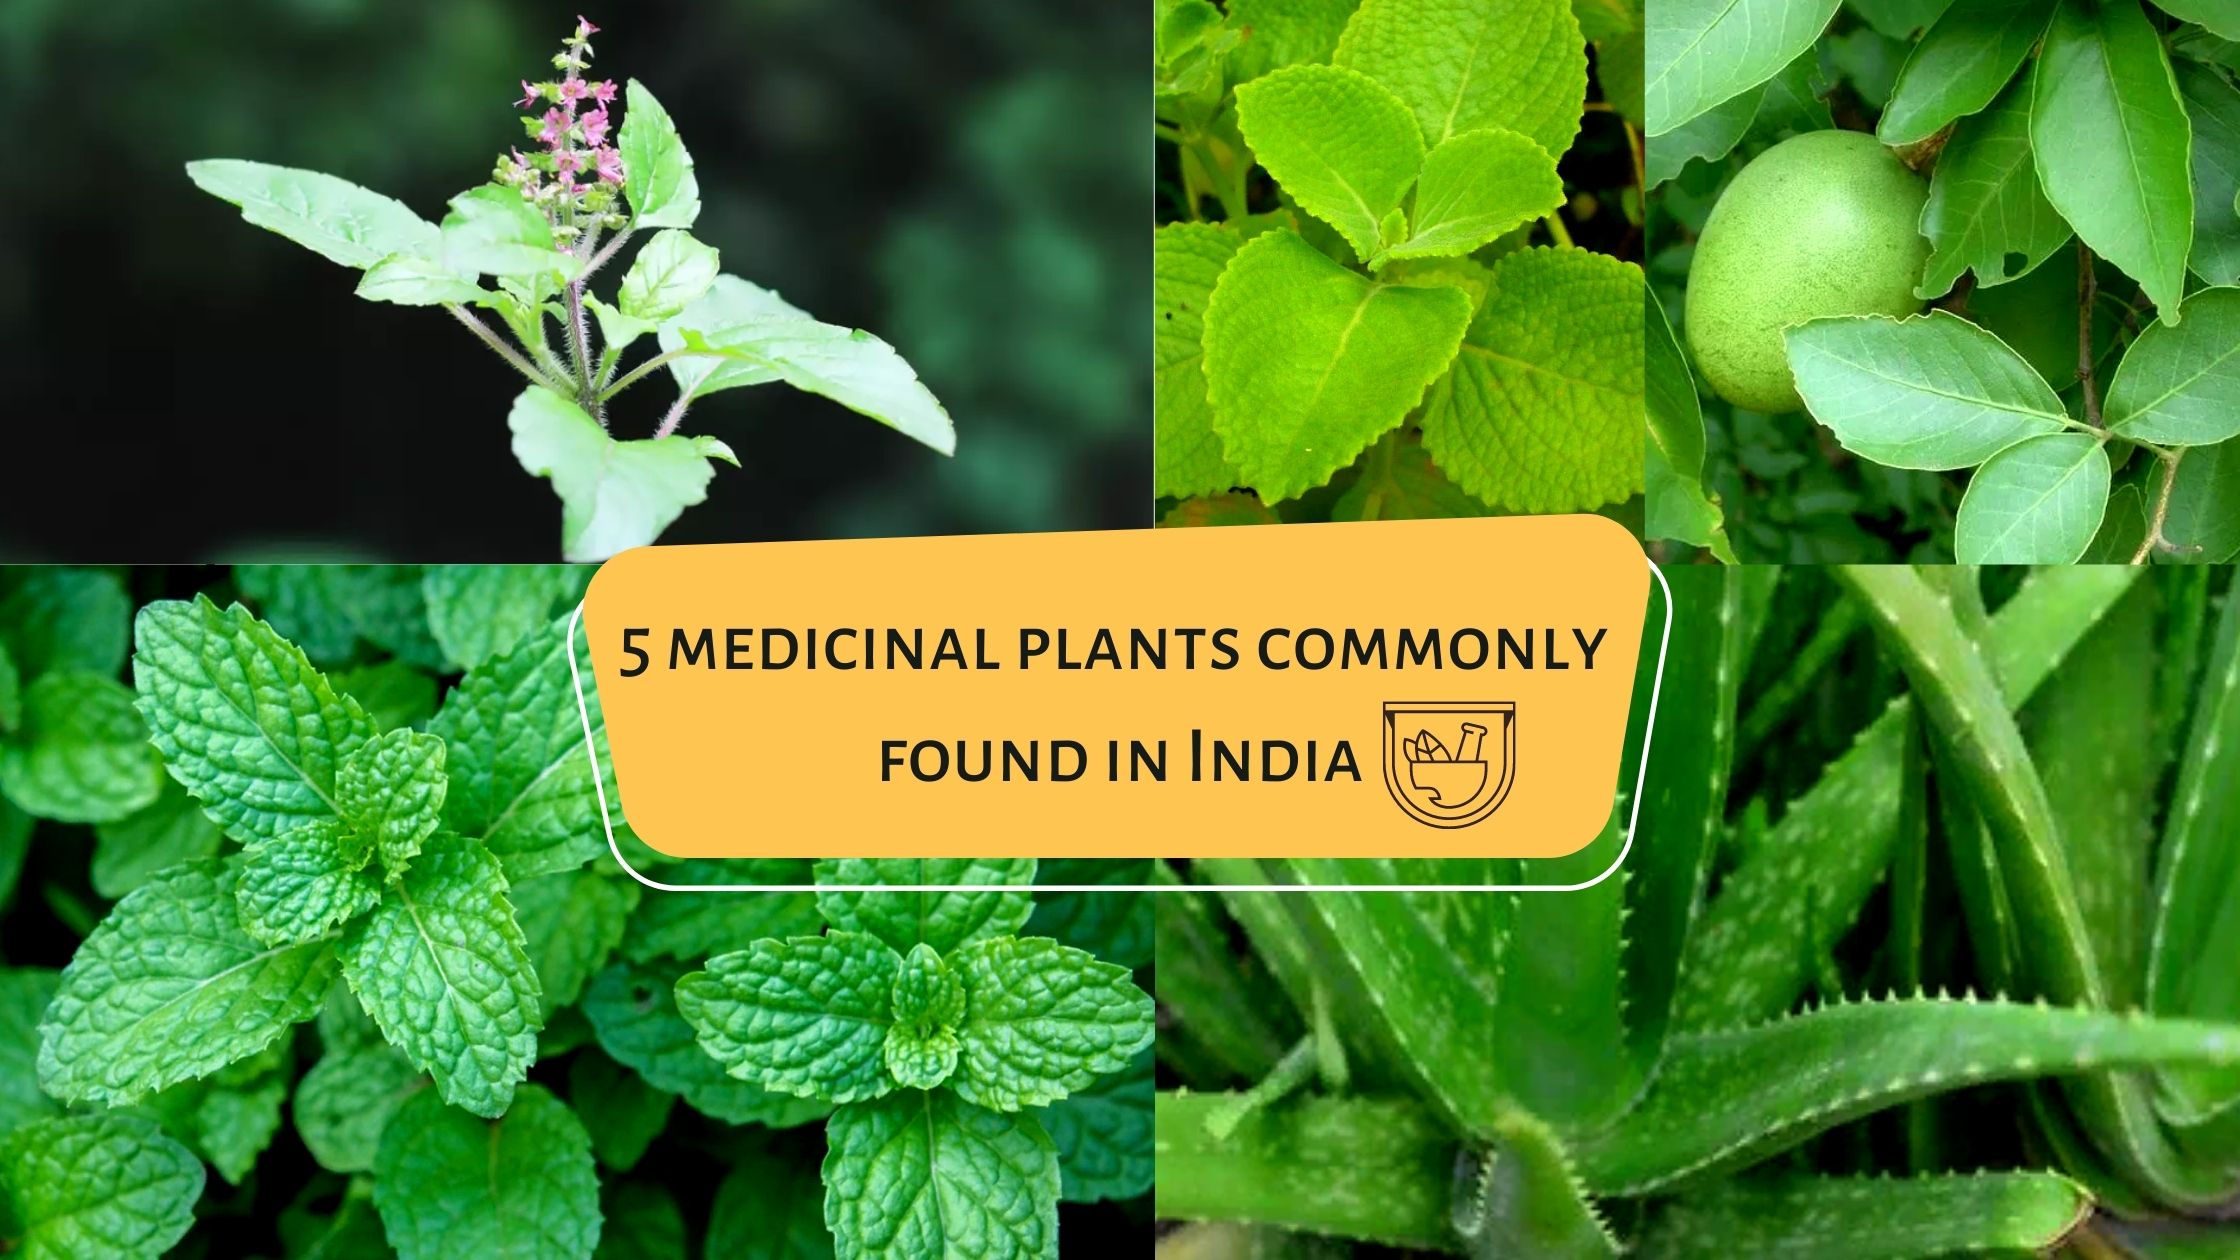 5 medicinal plants commonly found in India